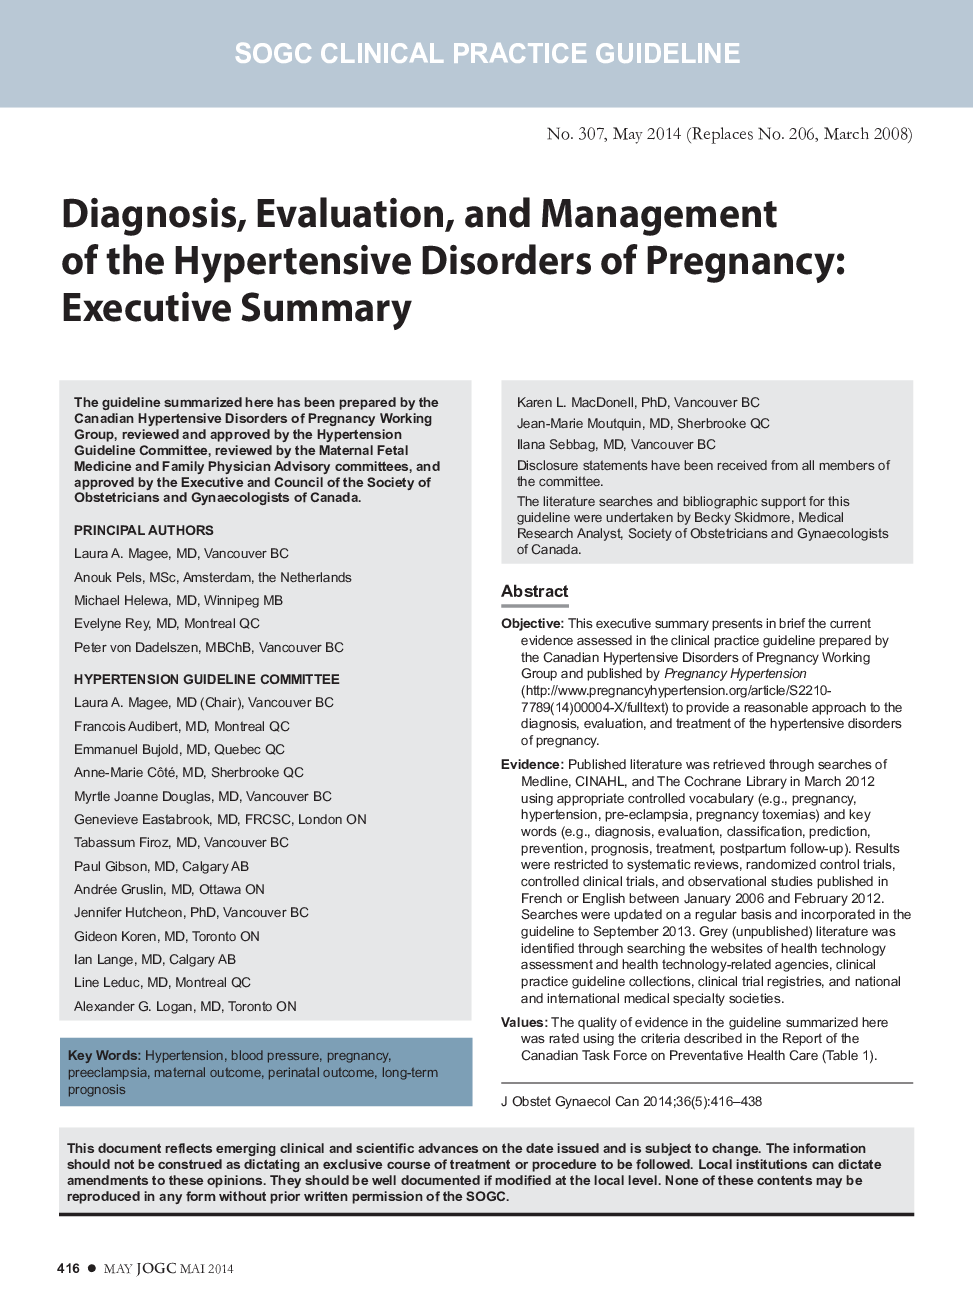 Diagnosis, Evaluation, and Management of the Hypertensive Disorders of Pregnancy: Executive Summary